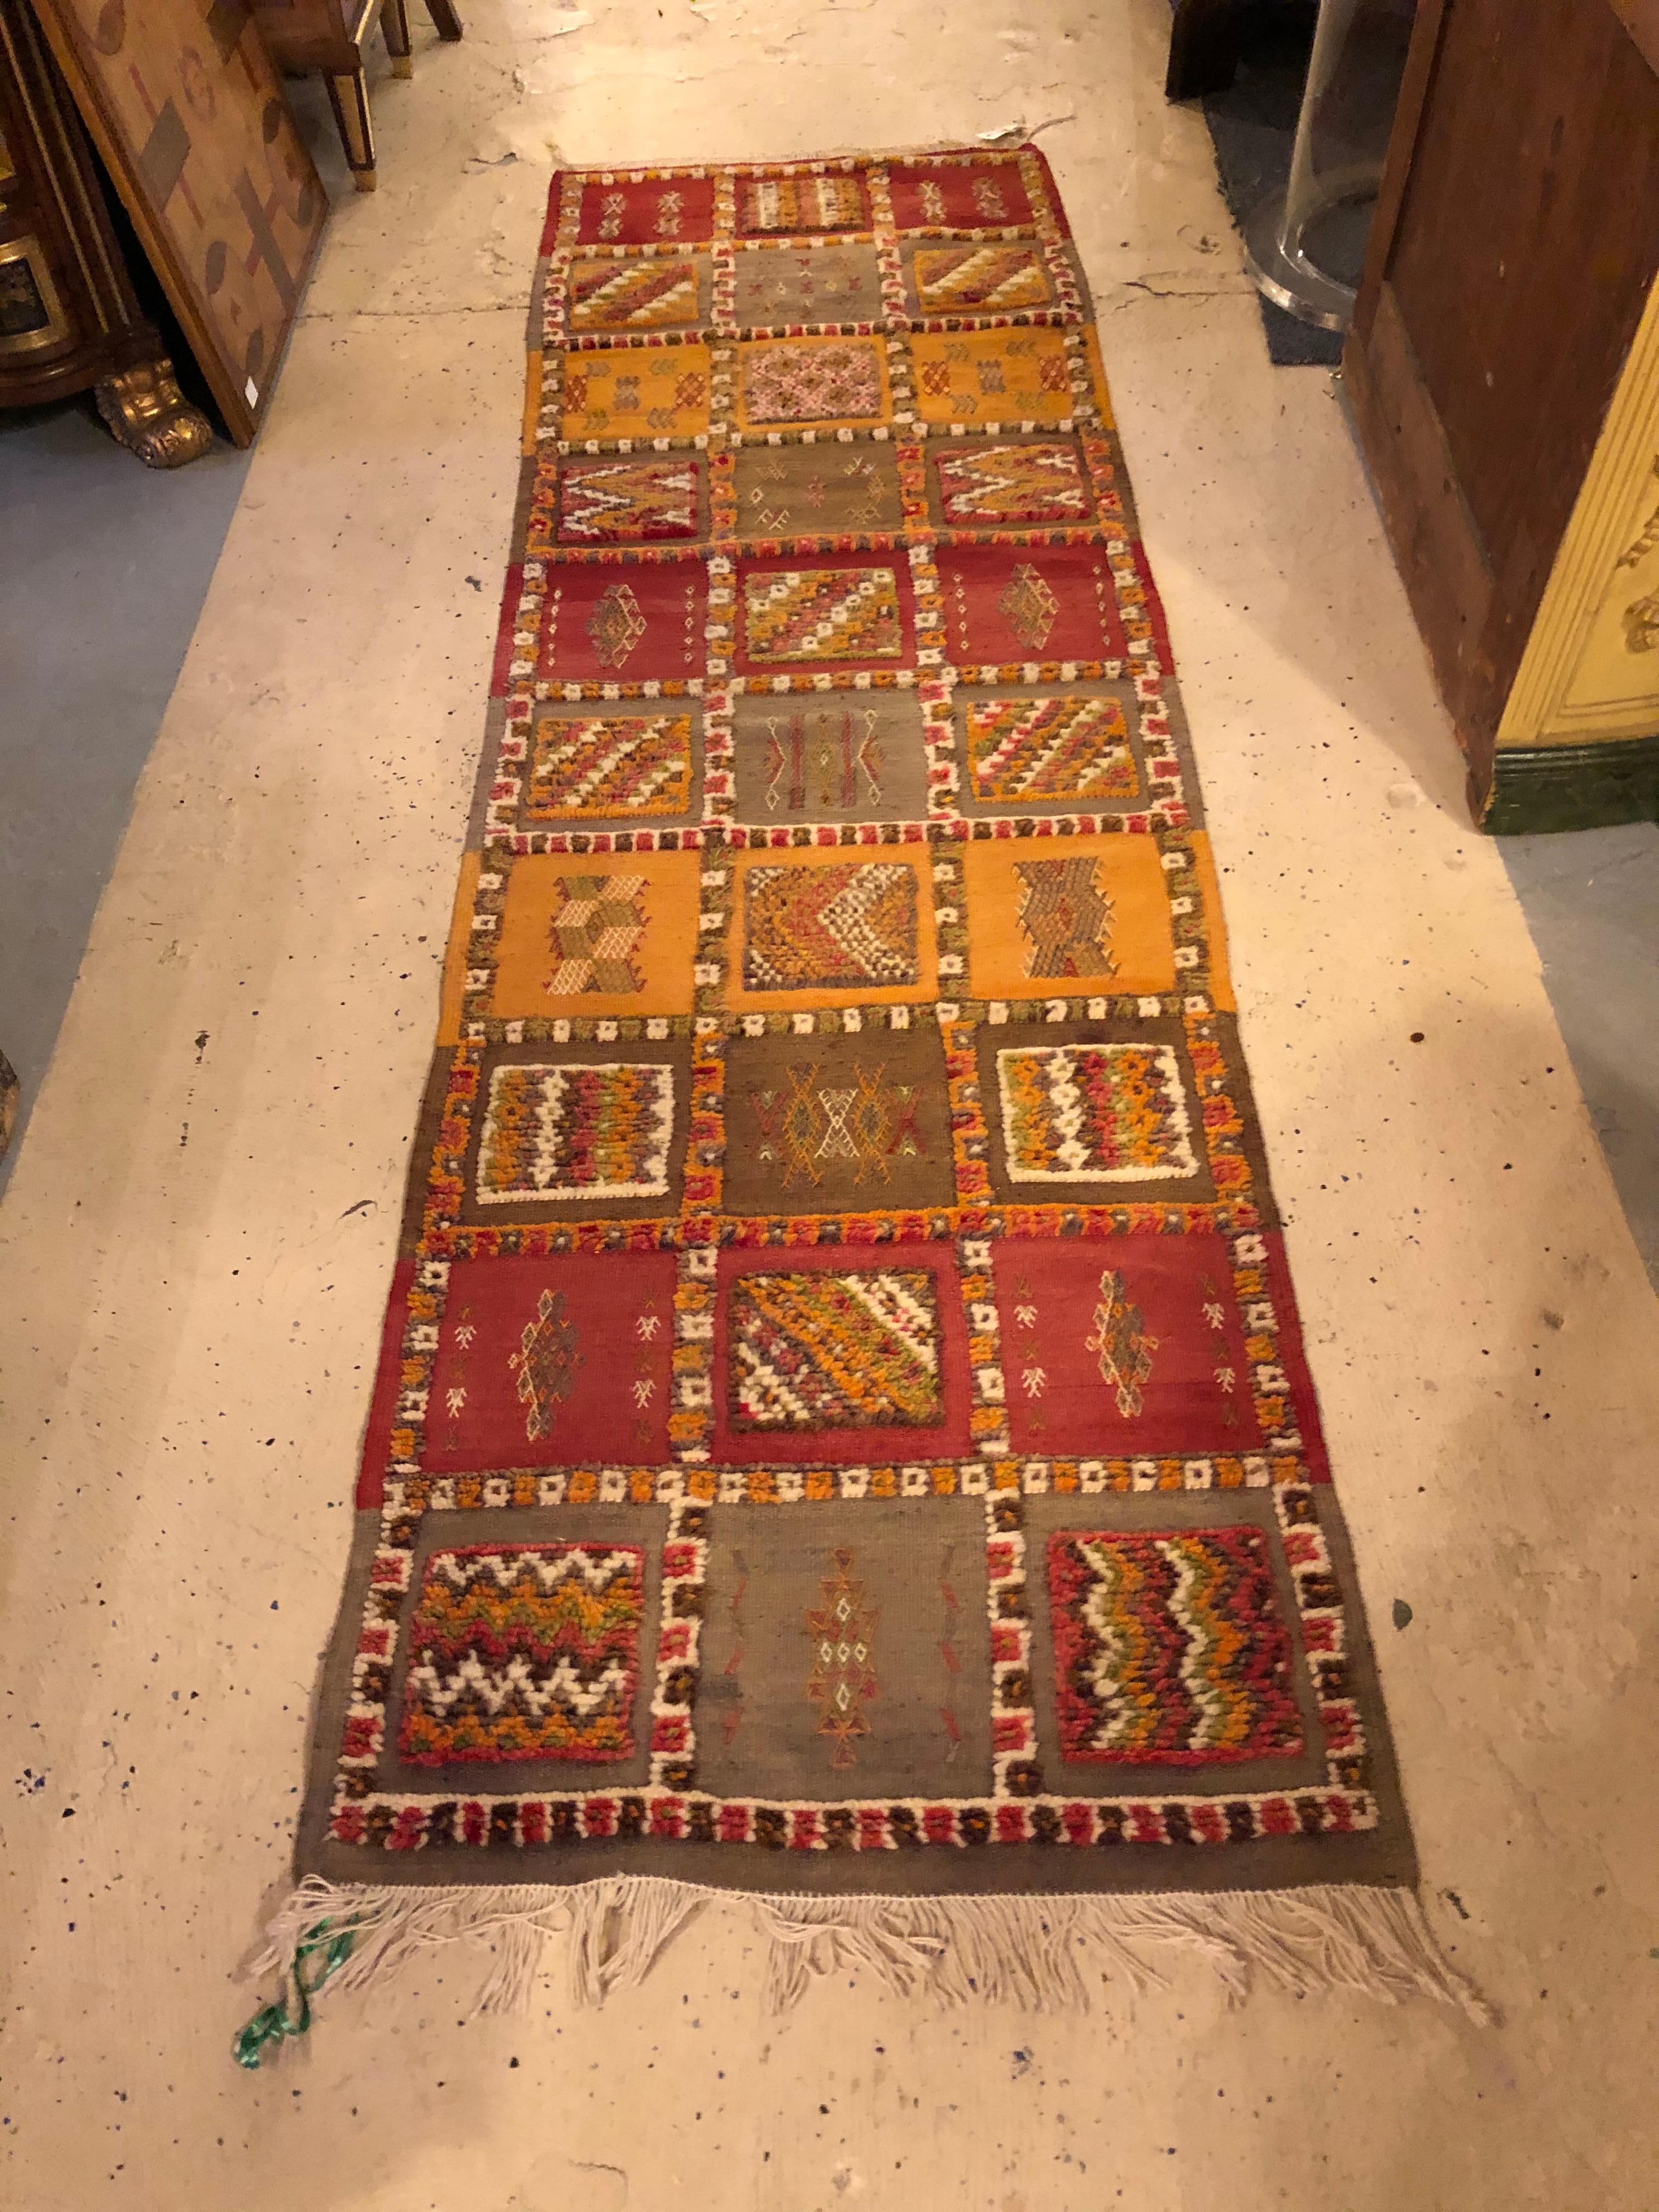 This elegant vintage tribal Moroccan runner rug or carpet is an ennobling addition to hallways, foyers, entryways, dressing rooms, staircases and wherever else a slender rug is desired. Hand-woven rug from the Taznacht region of Morocco, the runner